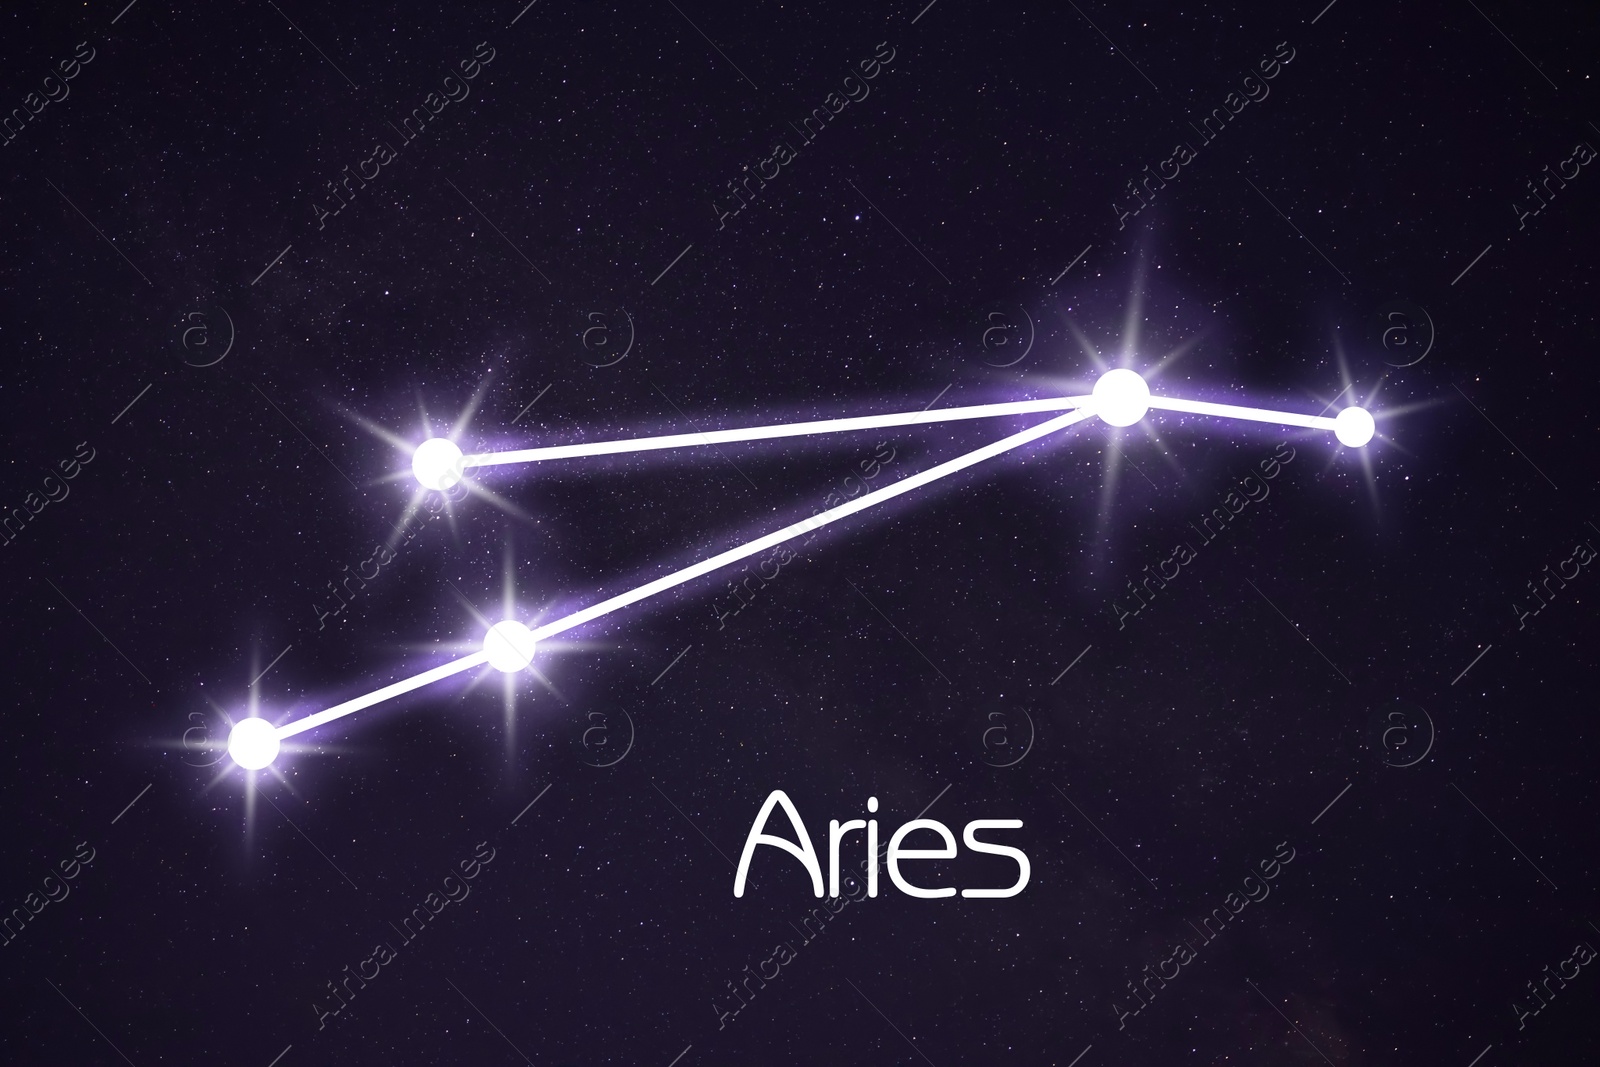 Image of Aries constellation. Stick figure pattern in starry night sky